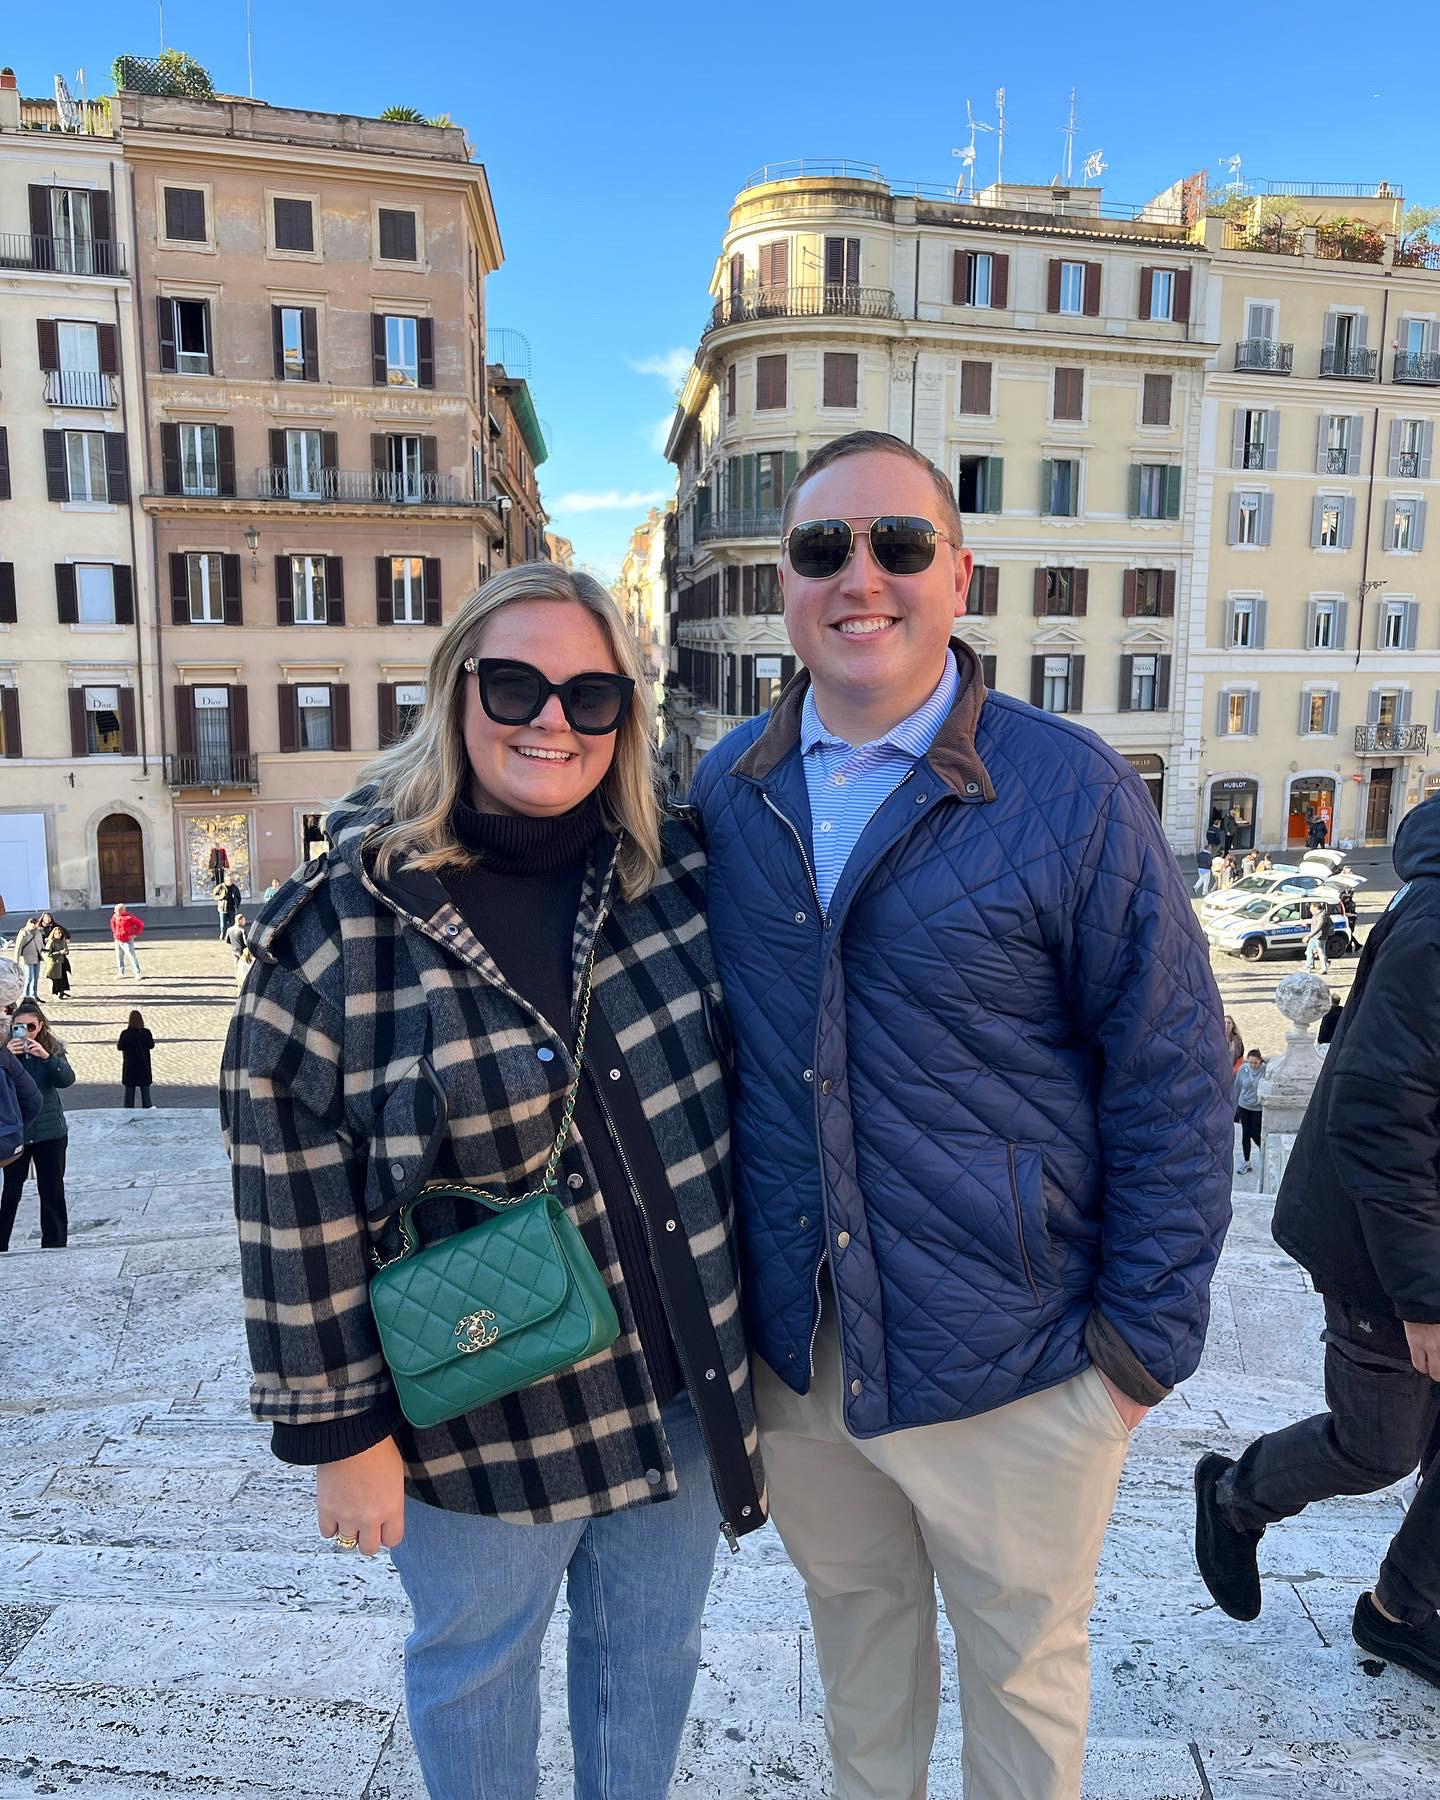 Dan & Abby on the Spanish Steps... a mere few hours later, they'll be engaged! - November 2022